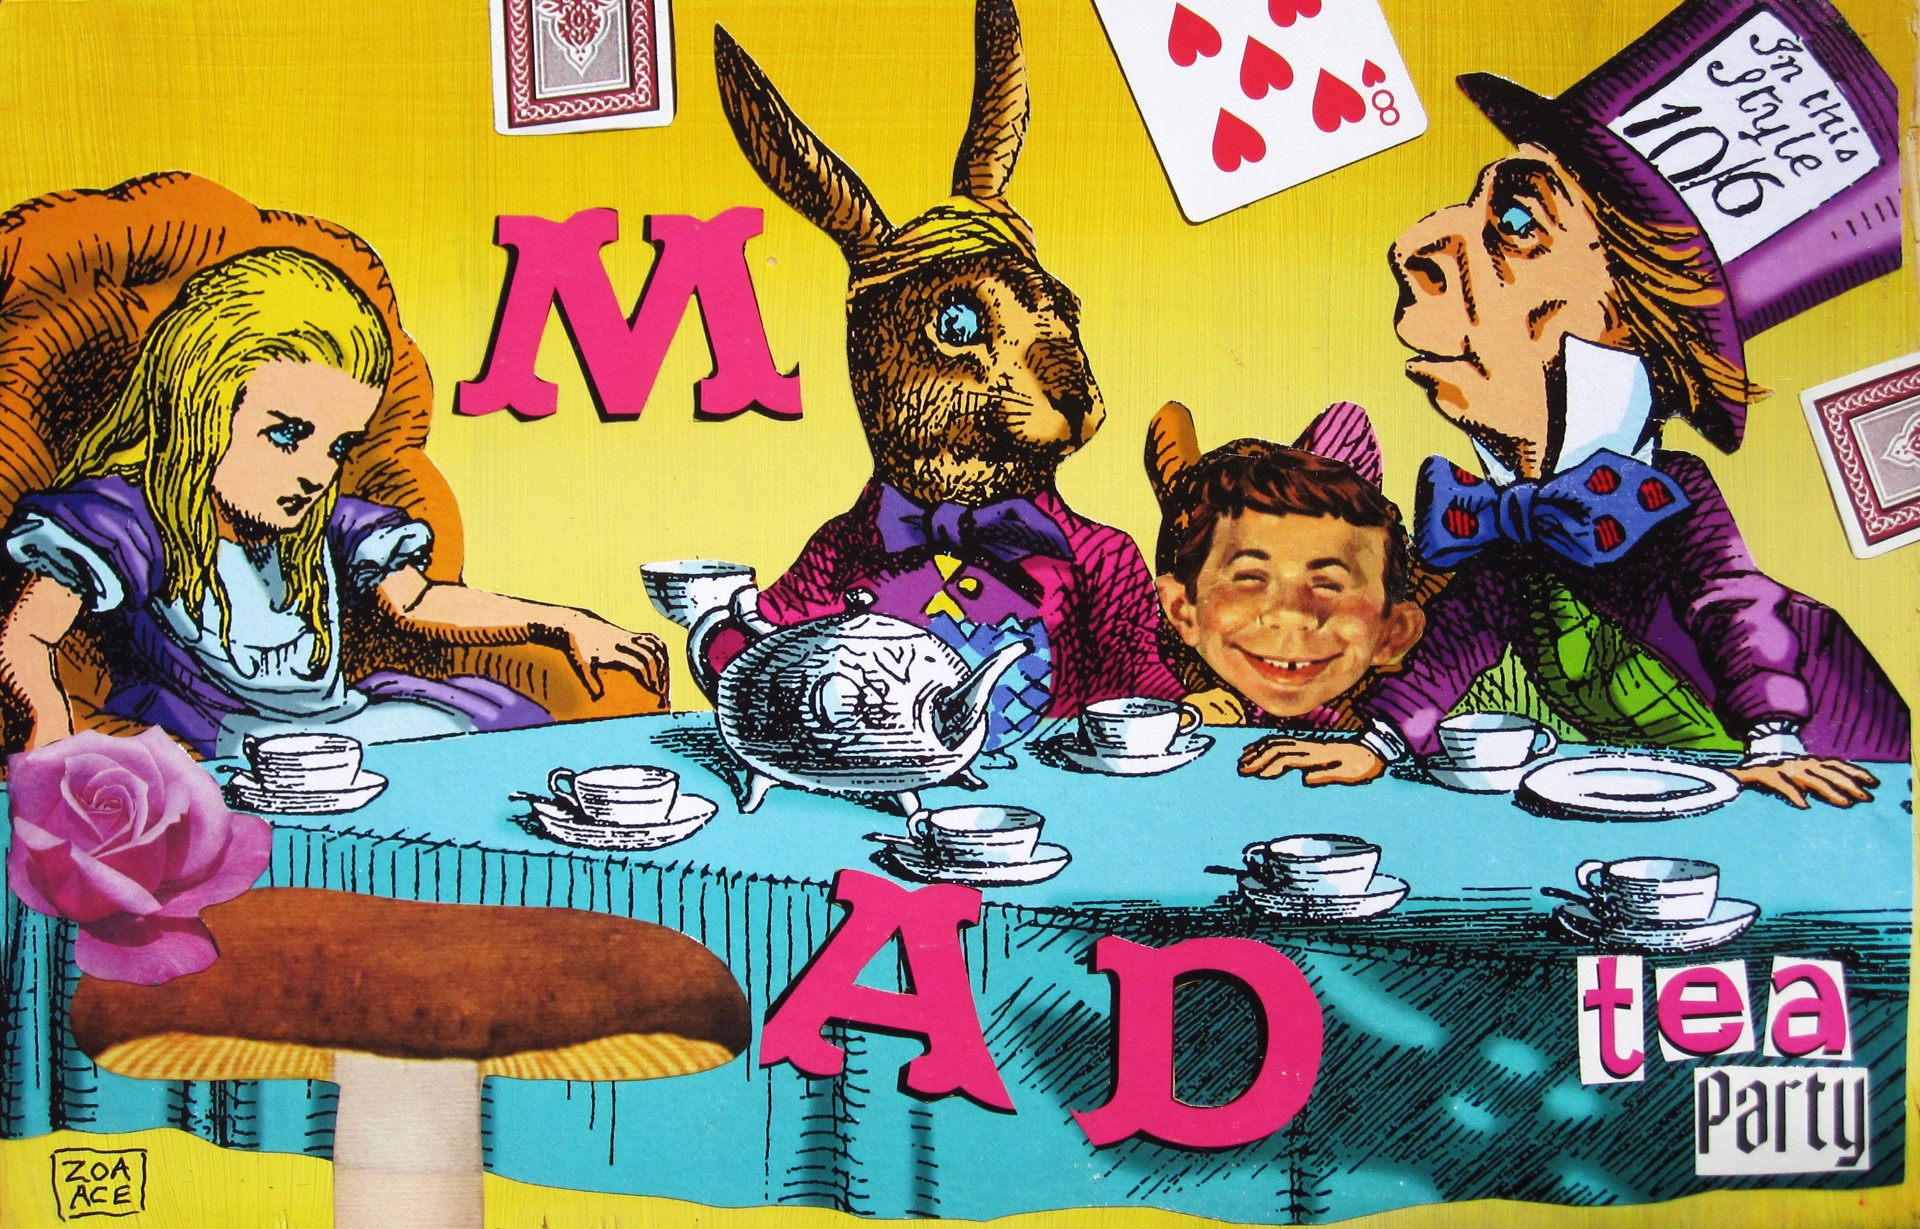 Mad Tea Party by Zoa Ace